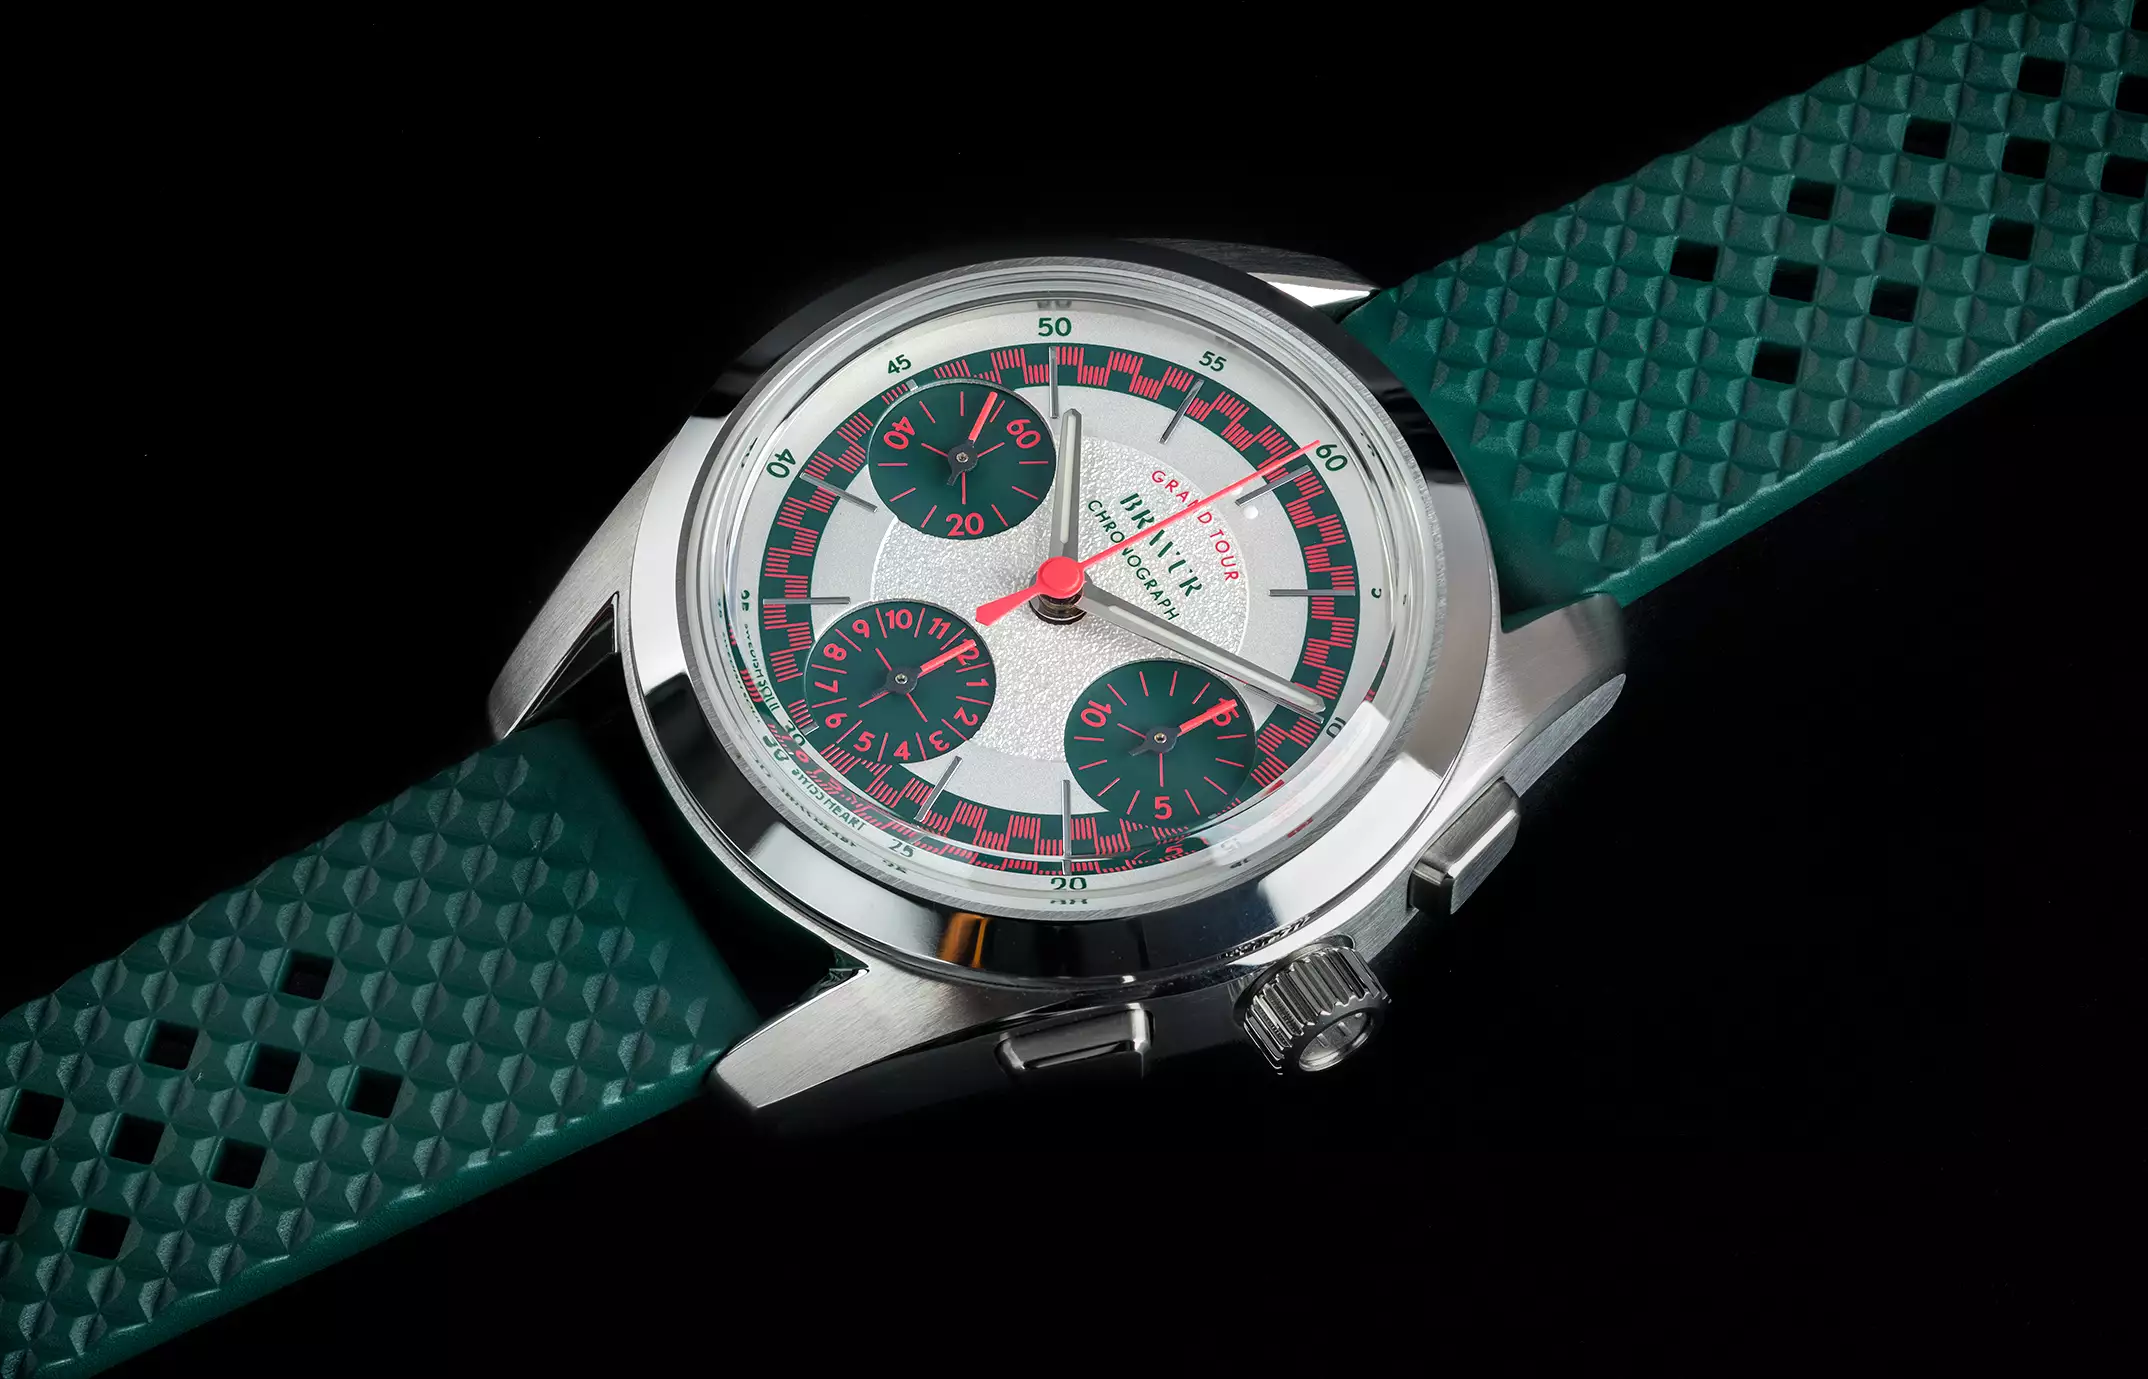 You Can Find This New Chronograph From Bravur Watches On The Wrists Of A Pro Cycling Team